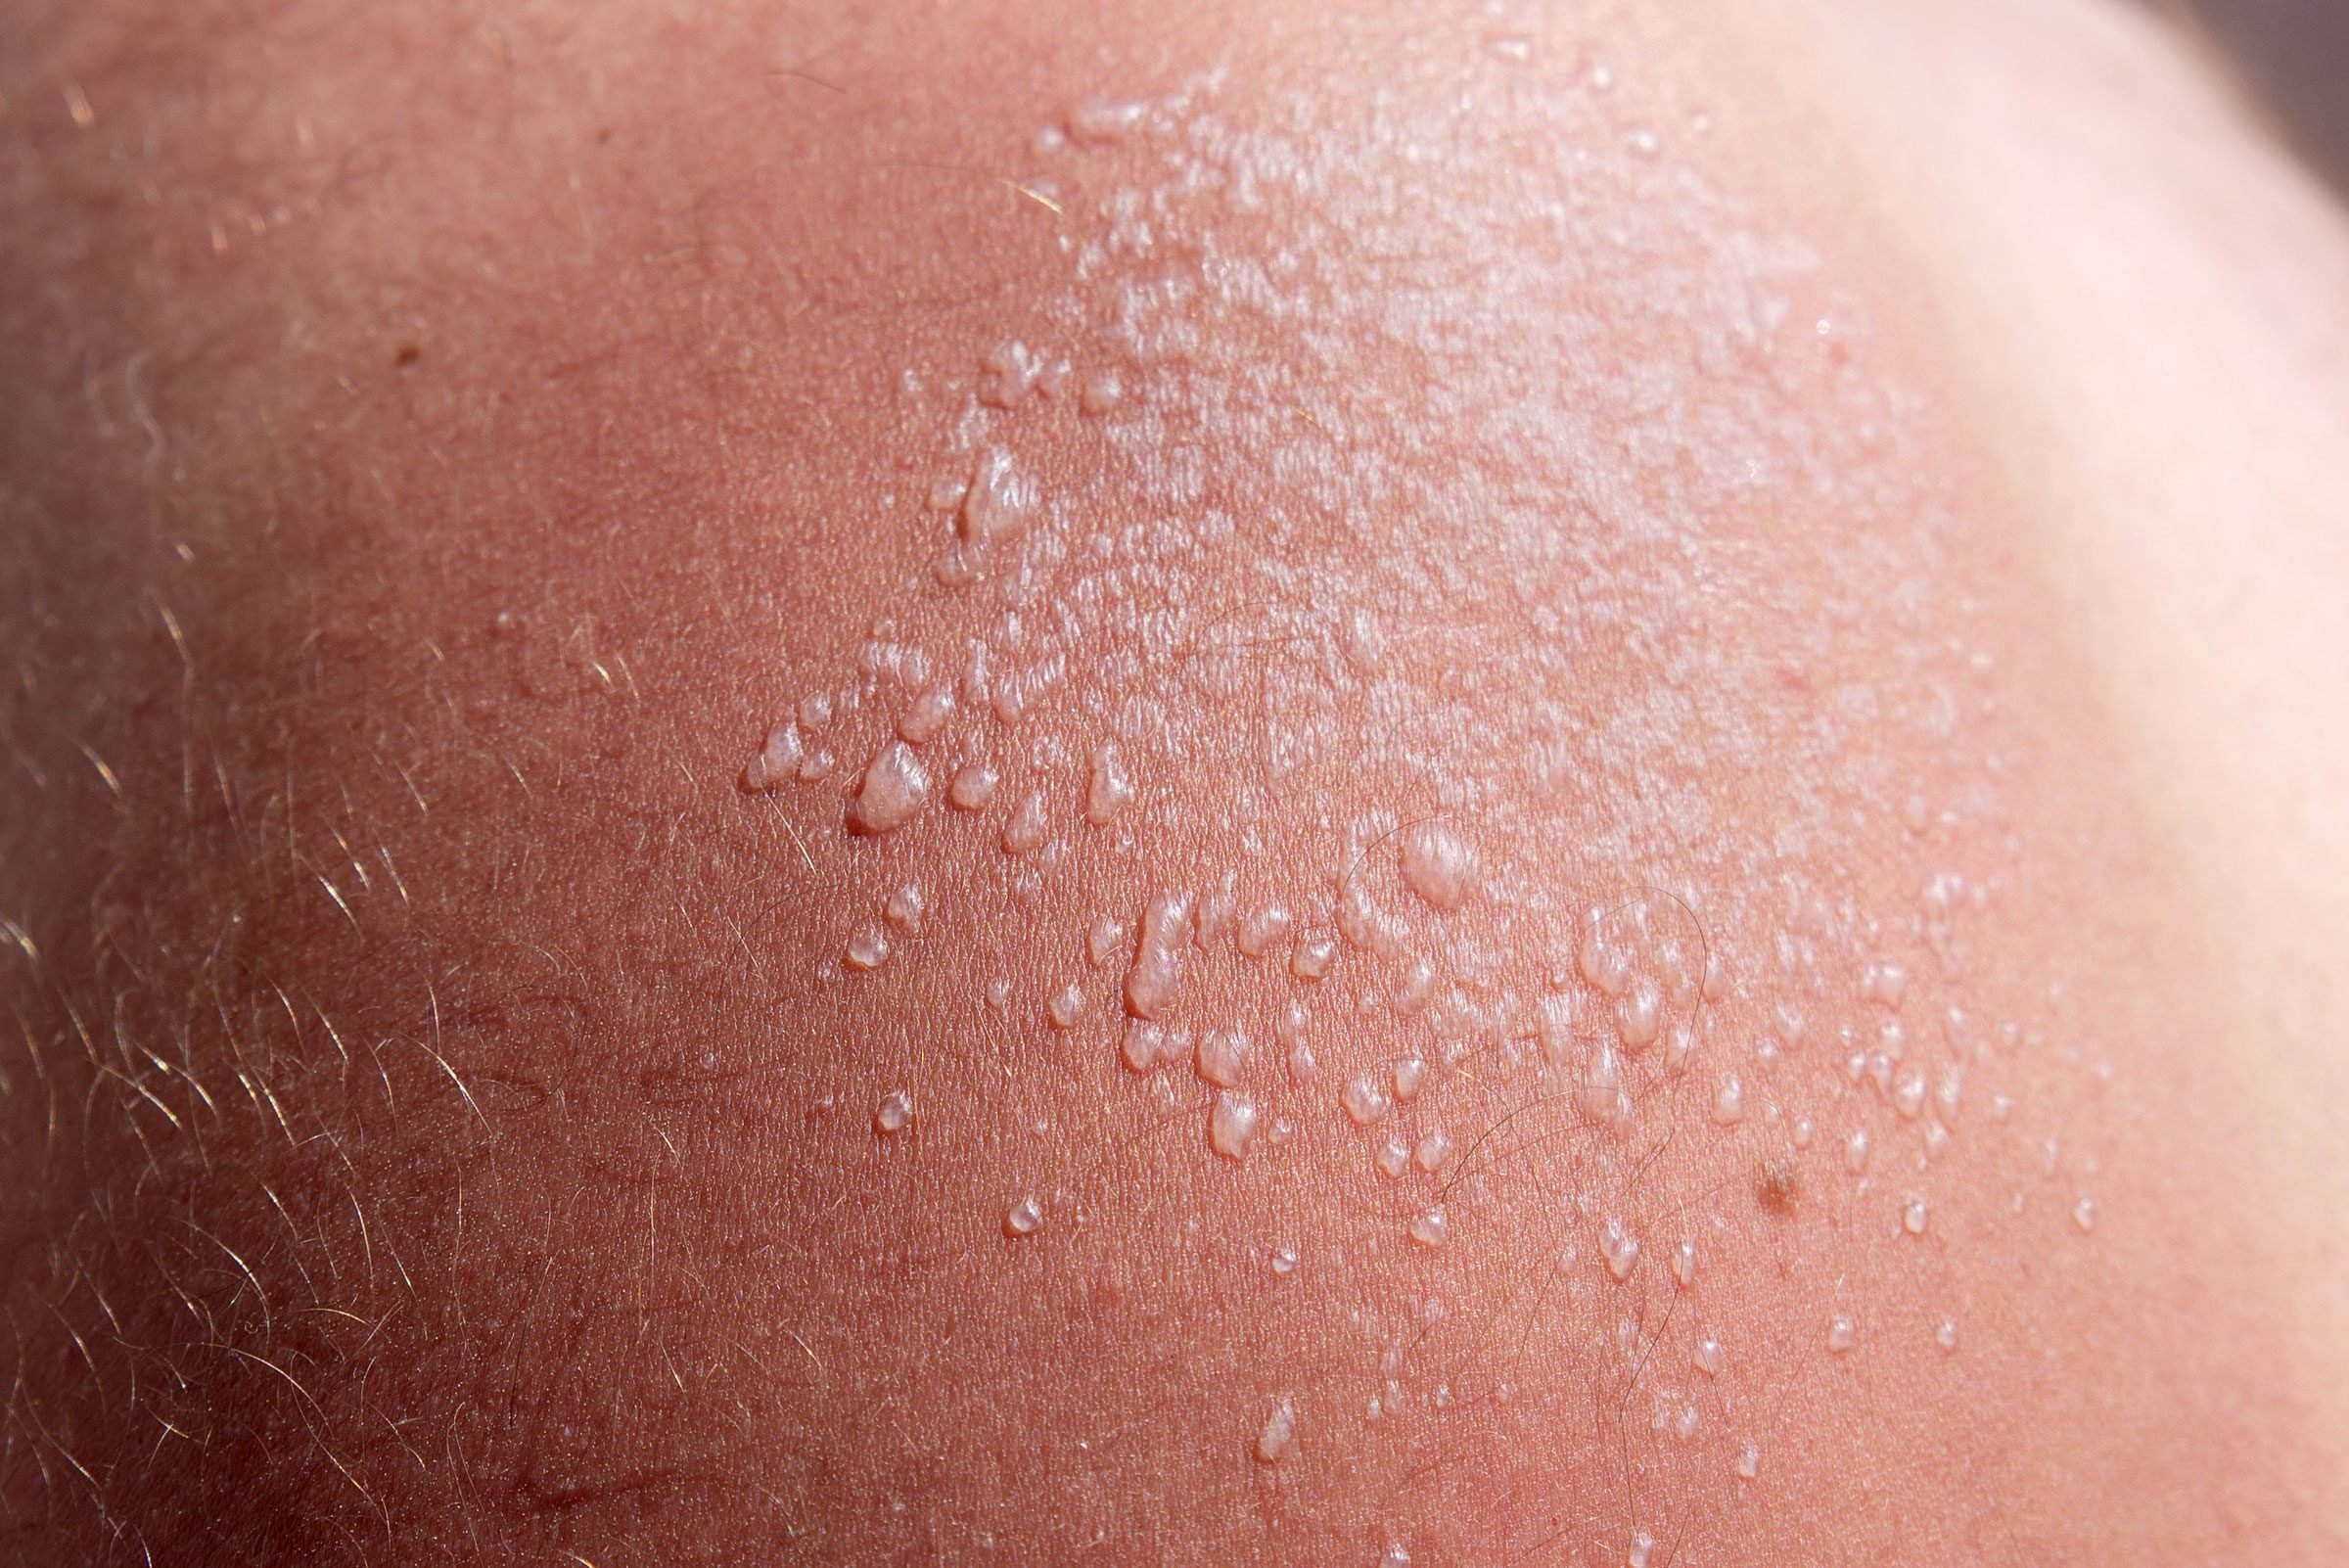 Sun Blister: Here's How to Tell If You Have One, and How to Treat It